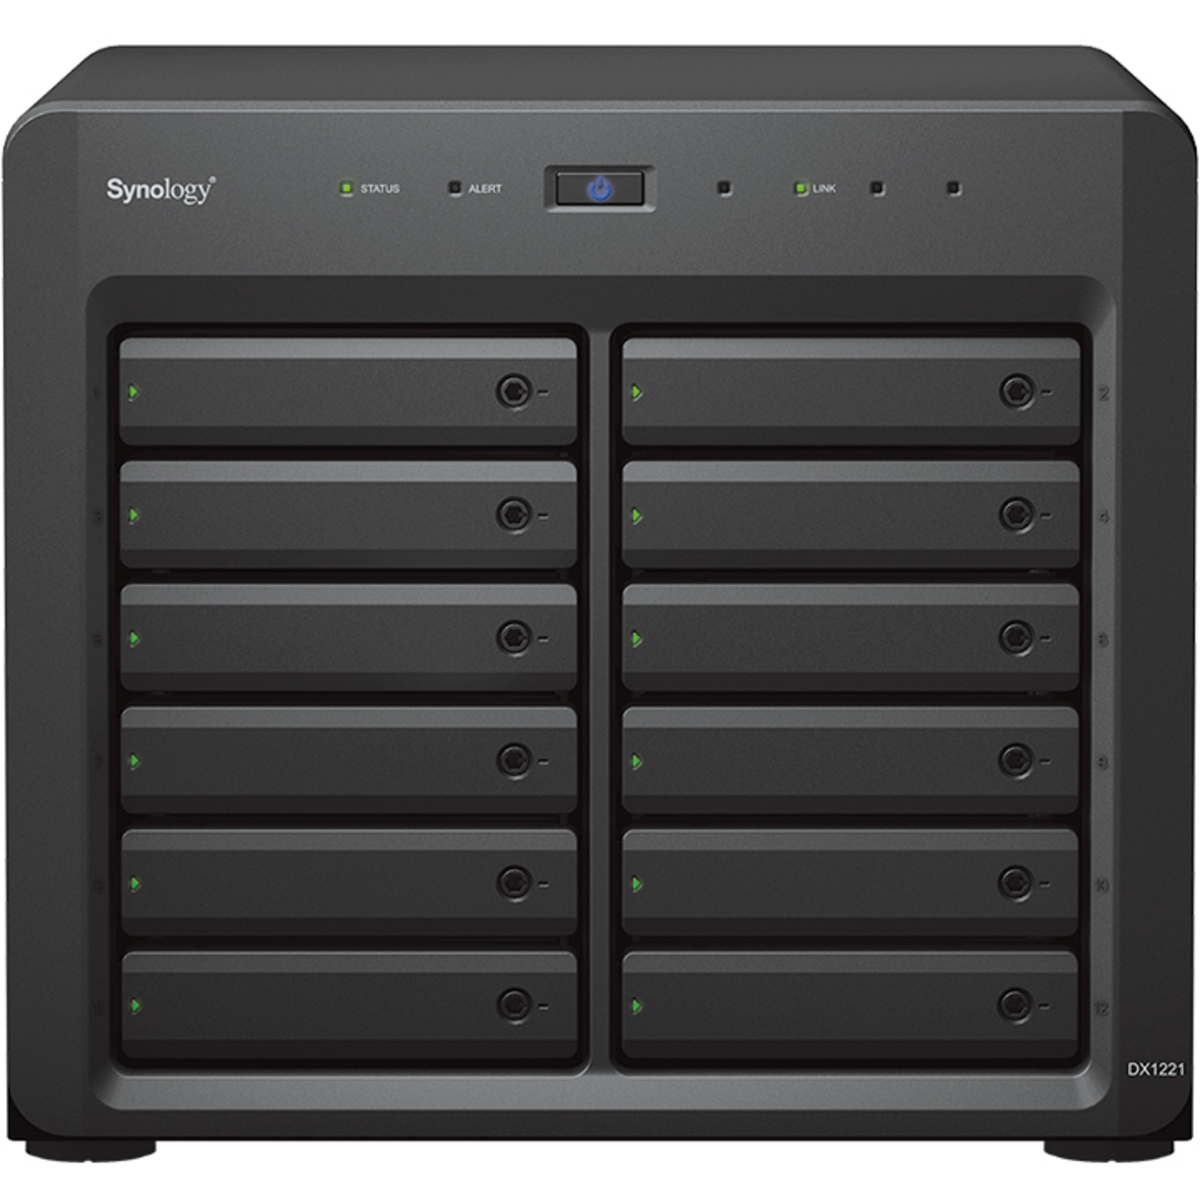 Synology DX1222 External Expansion Drive 3.5tb 12-Bay Desktop Multimedia / Power User / Business Expansion Enclosure 7x500gb Western Digital Red SA500 WDS500G1R0A 2.5 560/530MB/s SATA 6Gb/s SSD NAS Class Drives Installed - Burn-In Tested DX1222 External Expansion Drive